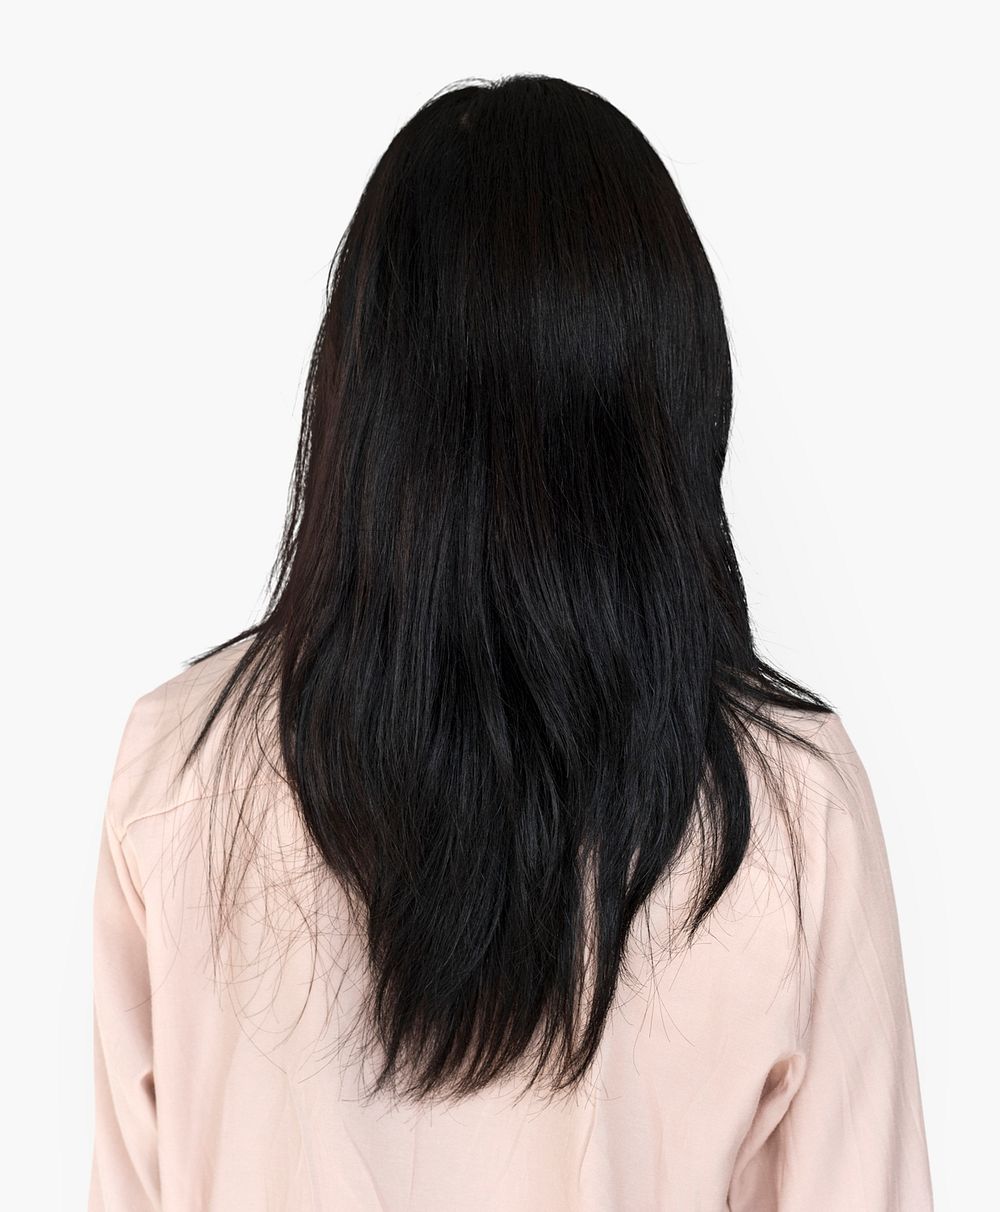 Rear view of woman showing her long black hair